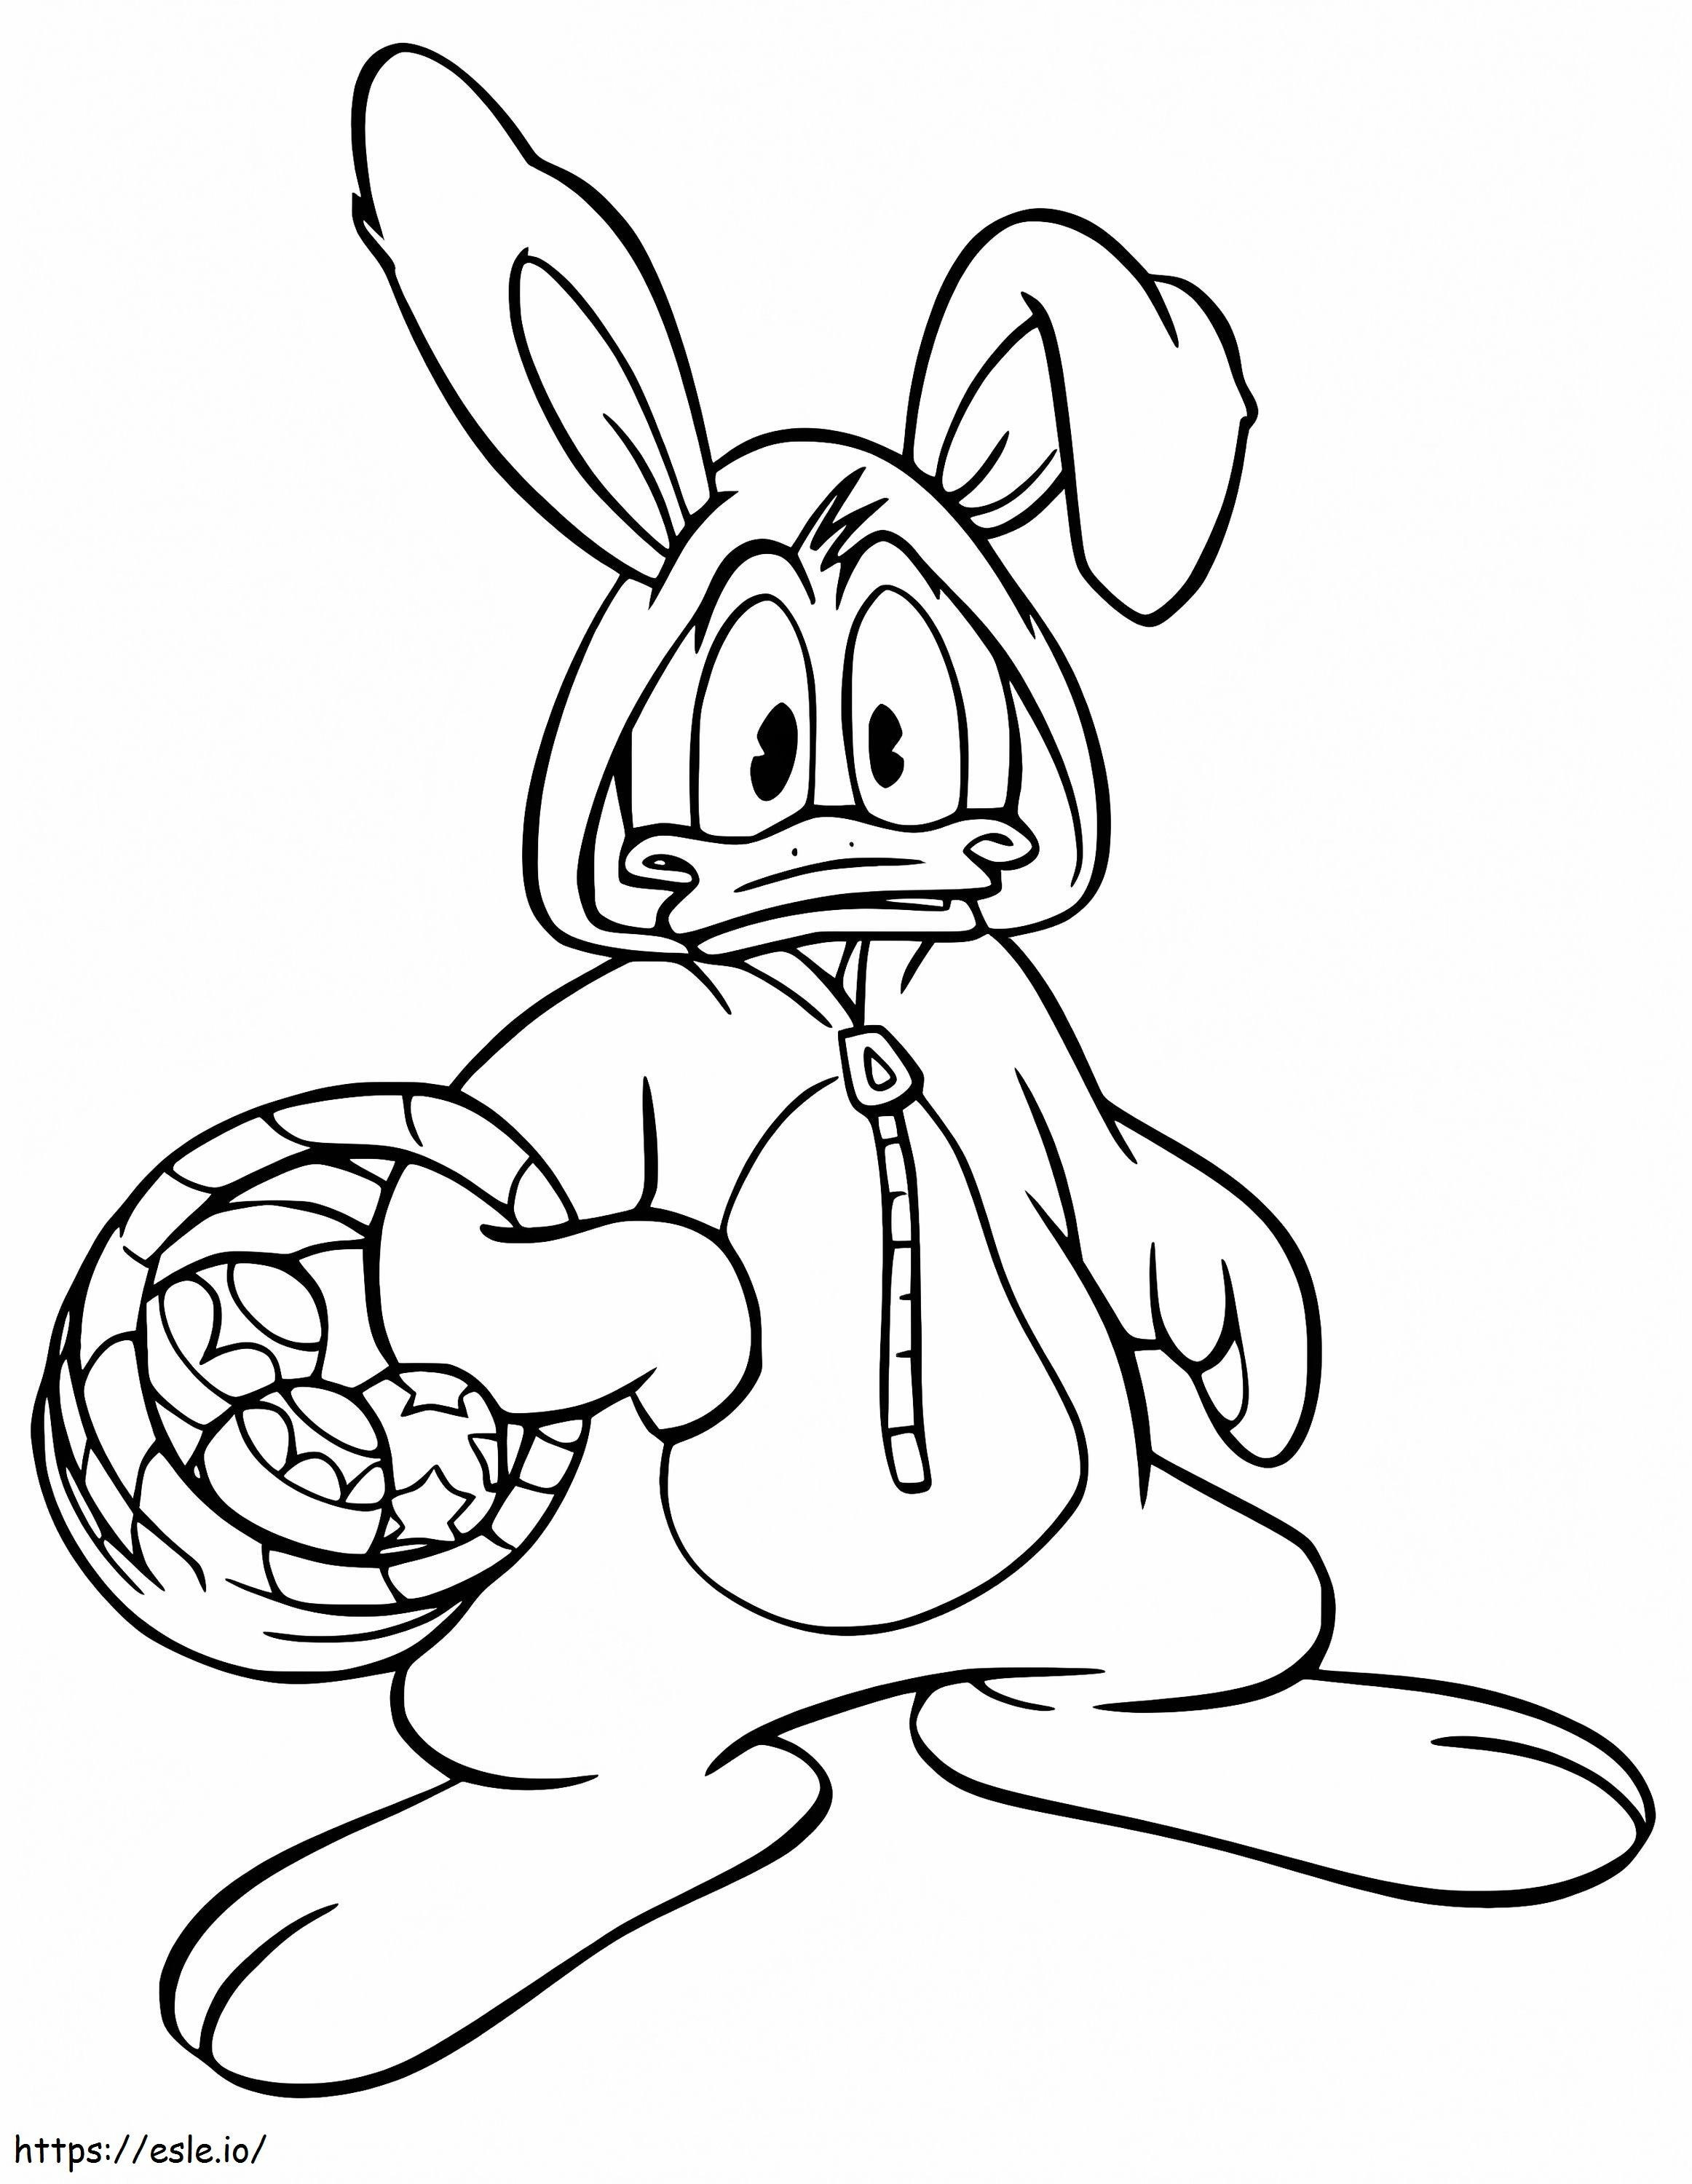 Donald Duck With Easter Basket coloring page